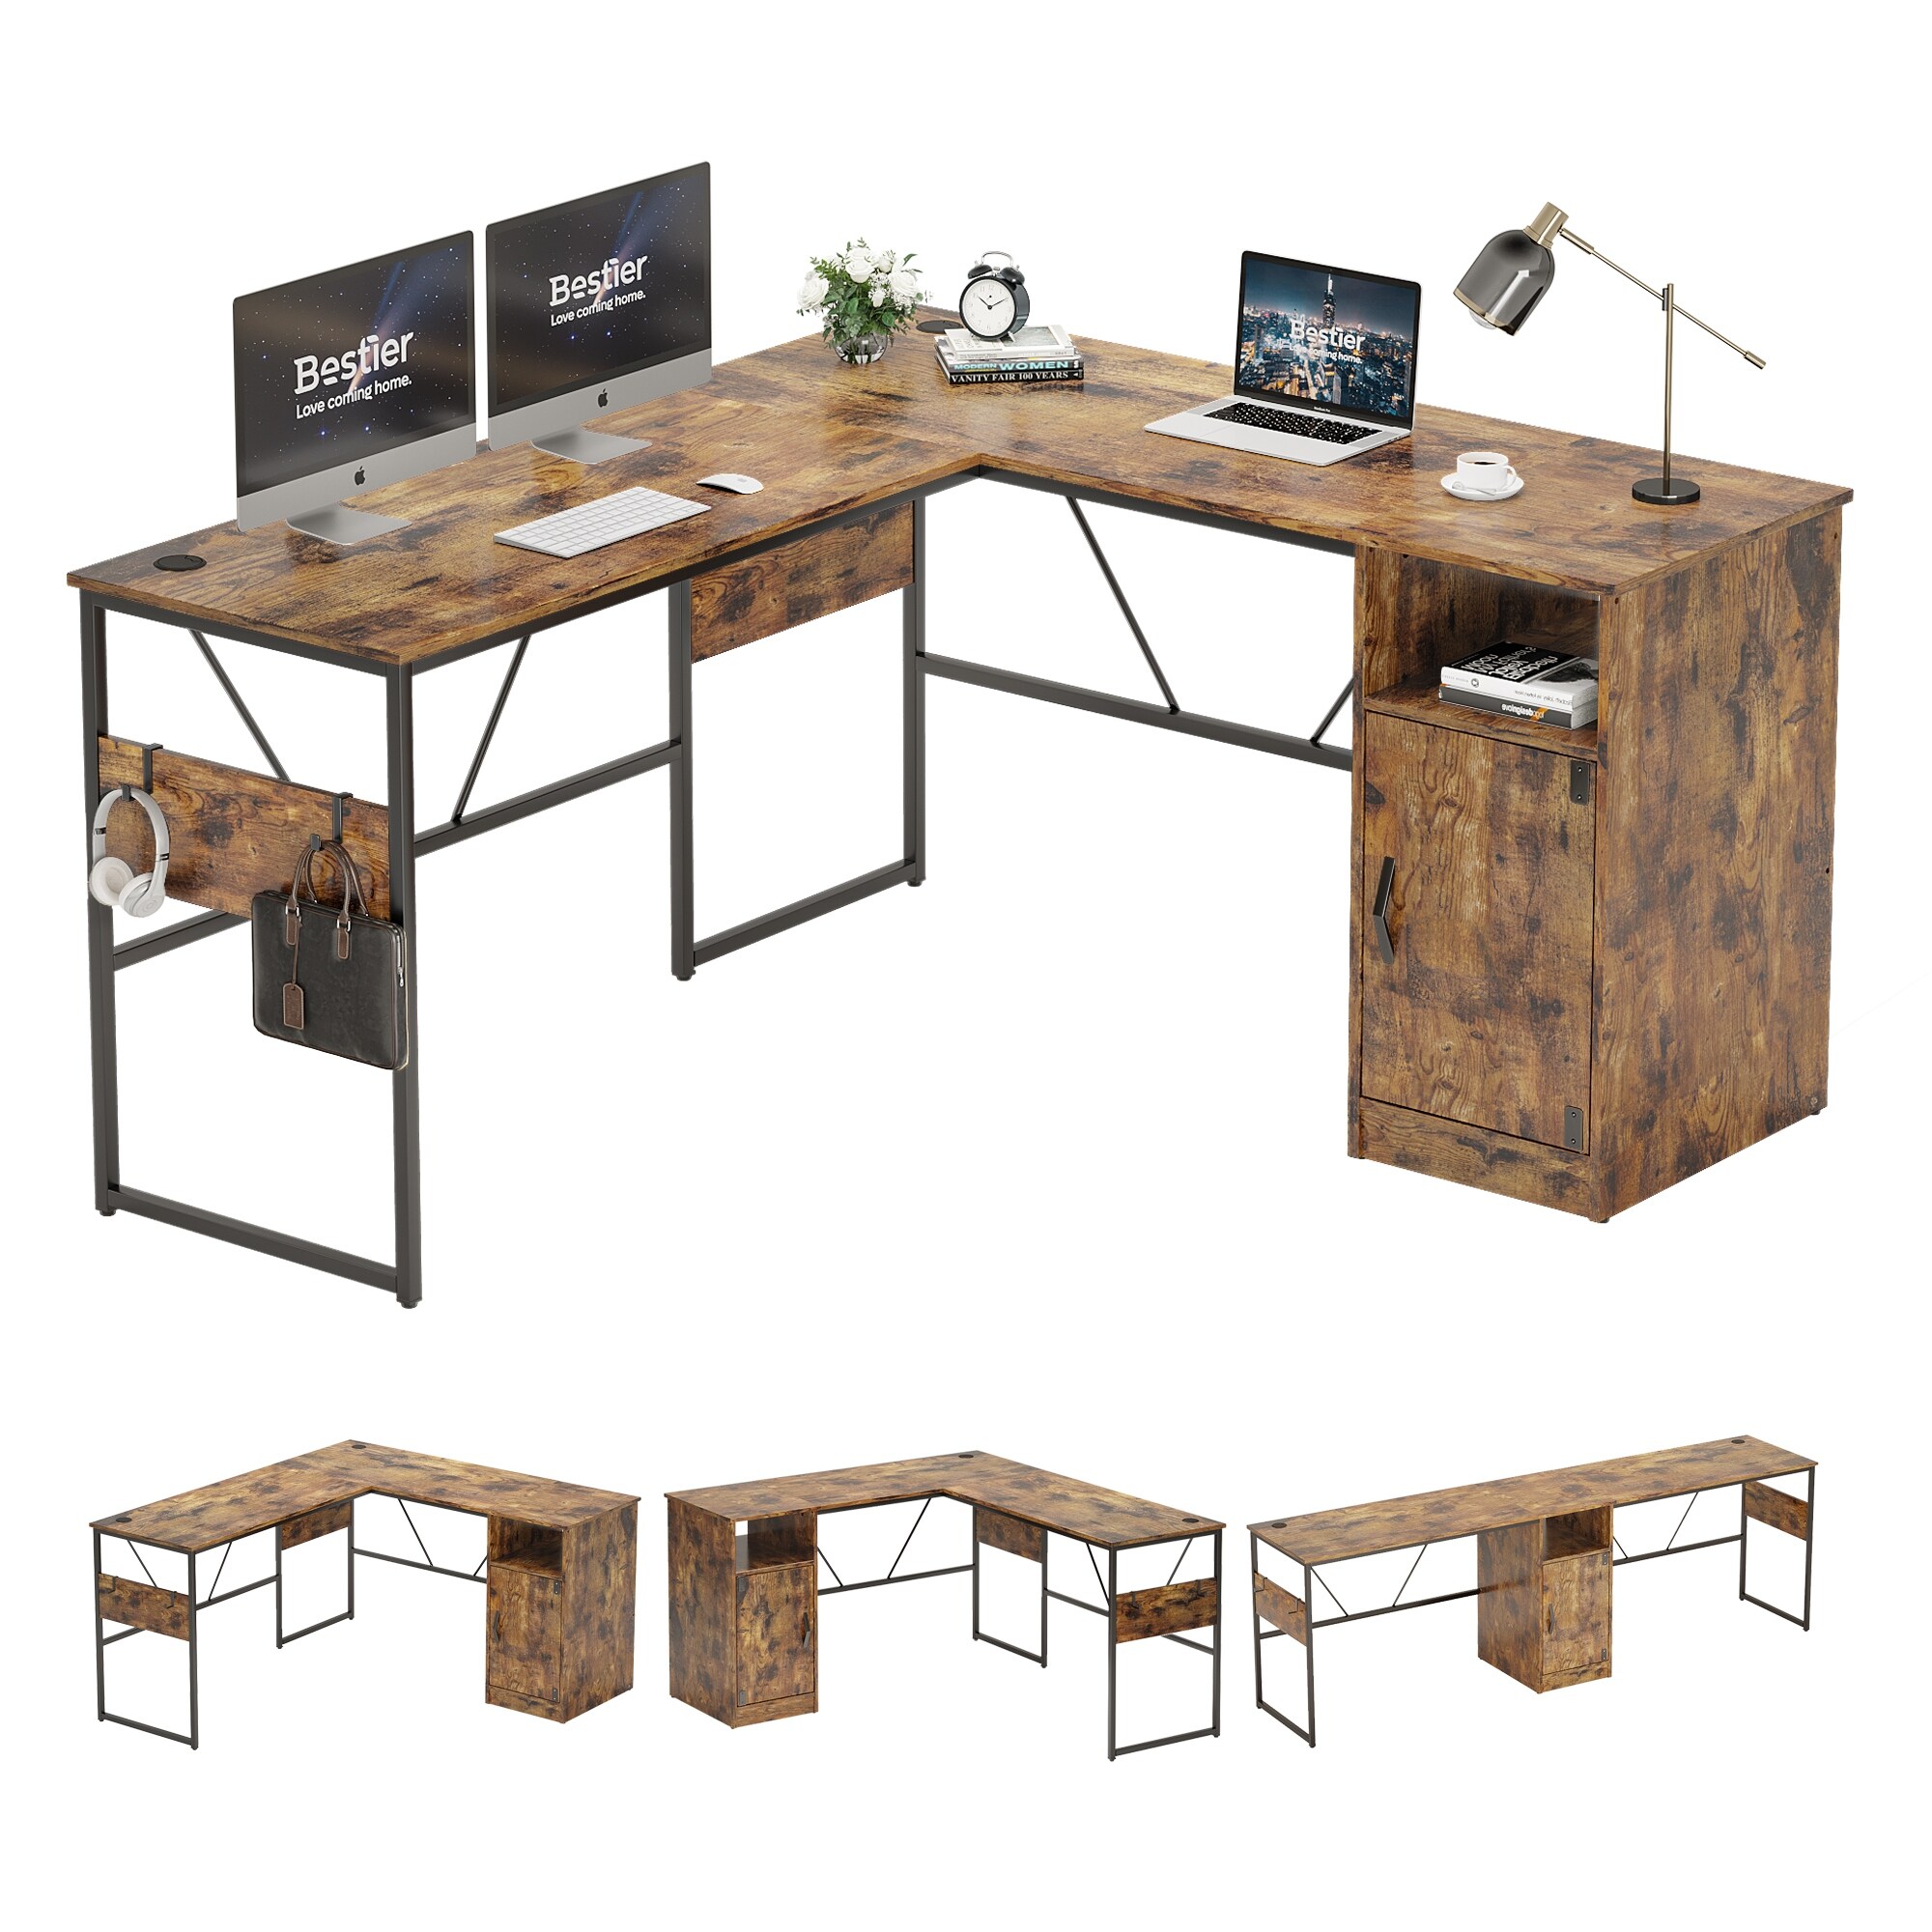 https://ak1.ostkcdn.com/images/products/is/images/direct/09eff15c22fc9847f497c12511c360e15121c1d3/60%27%27-L-shaped-Desk-with-Storage-Cabinet-Office-Computer-Desk.jpg